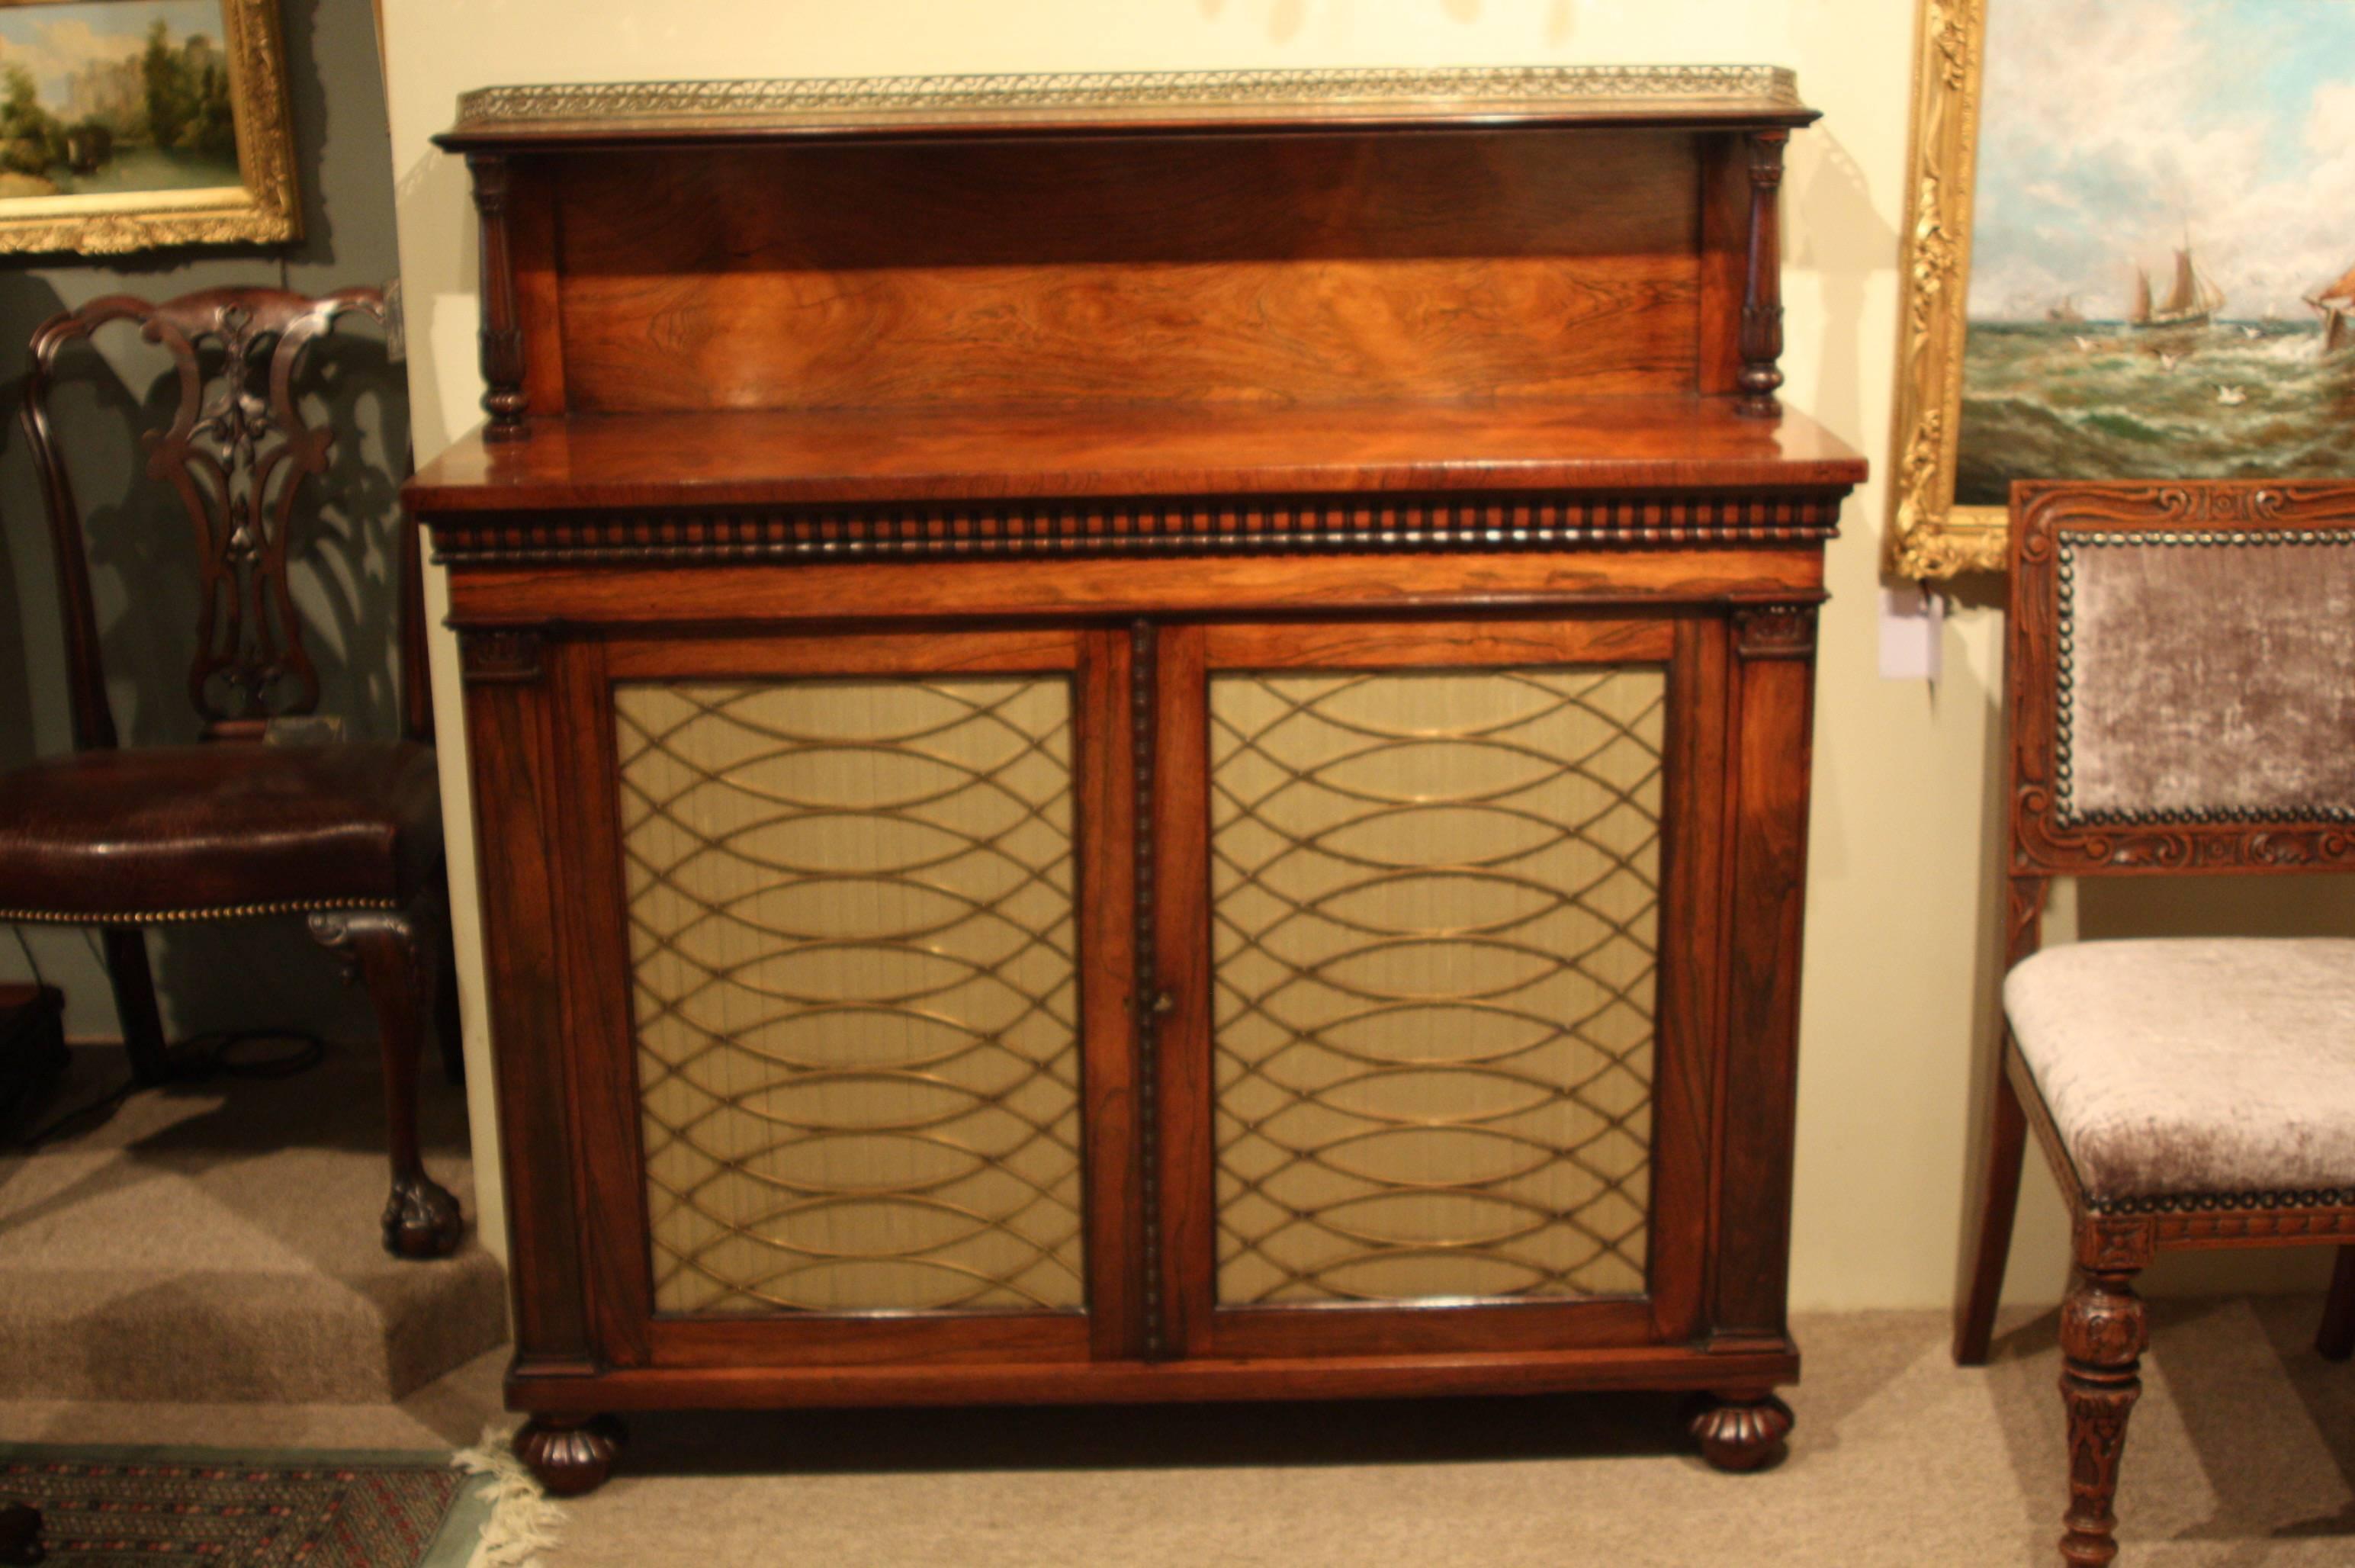 A fine Regency period rosewood chiffonier of exceptional quality, with a brass galleried ledge back over two brass grille doors, on melon carved feet. In the manner of Gillows.